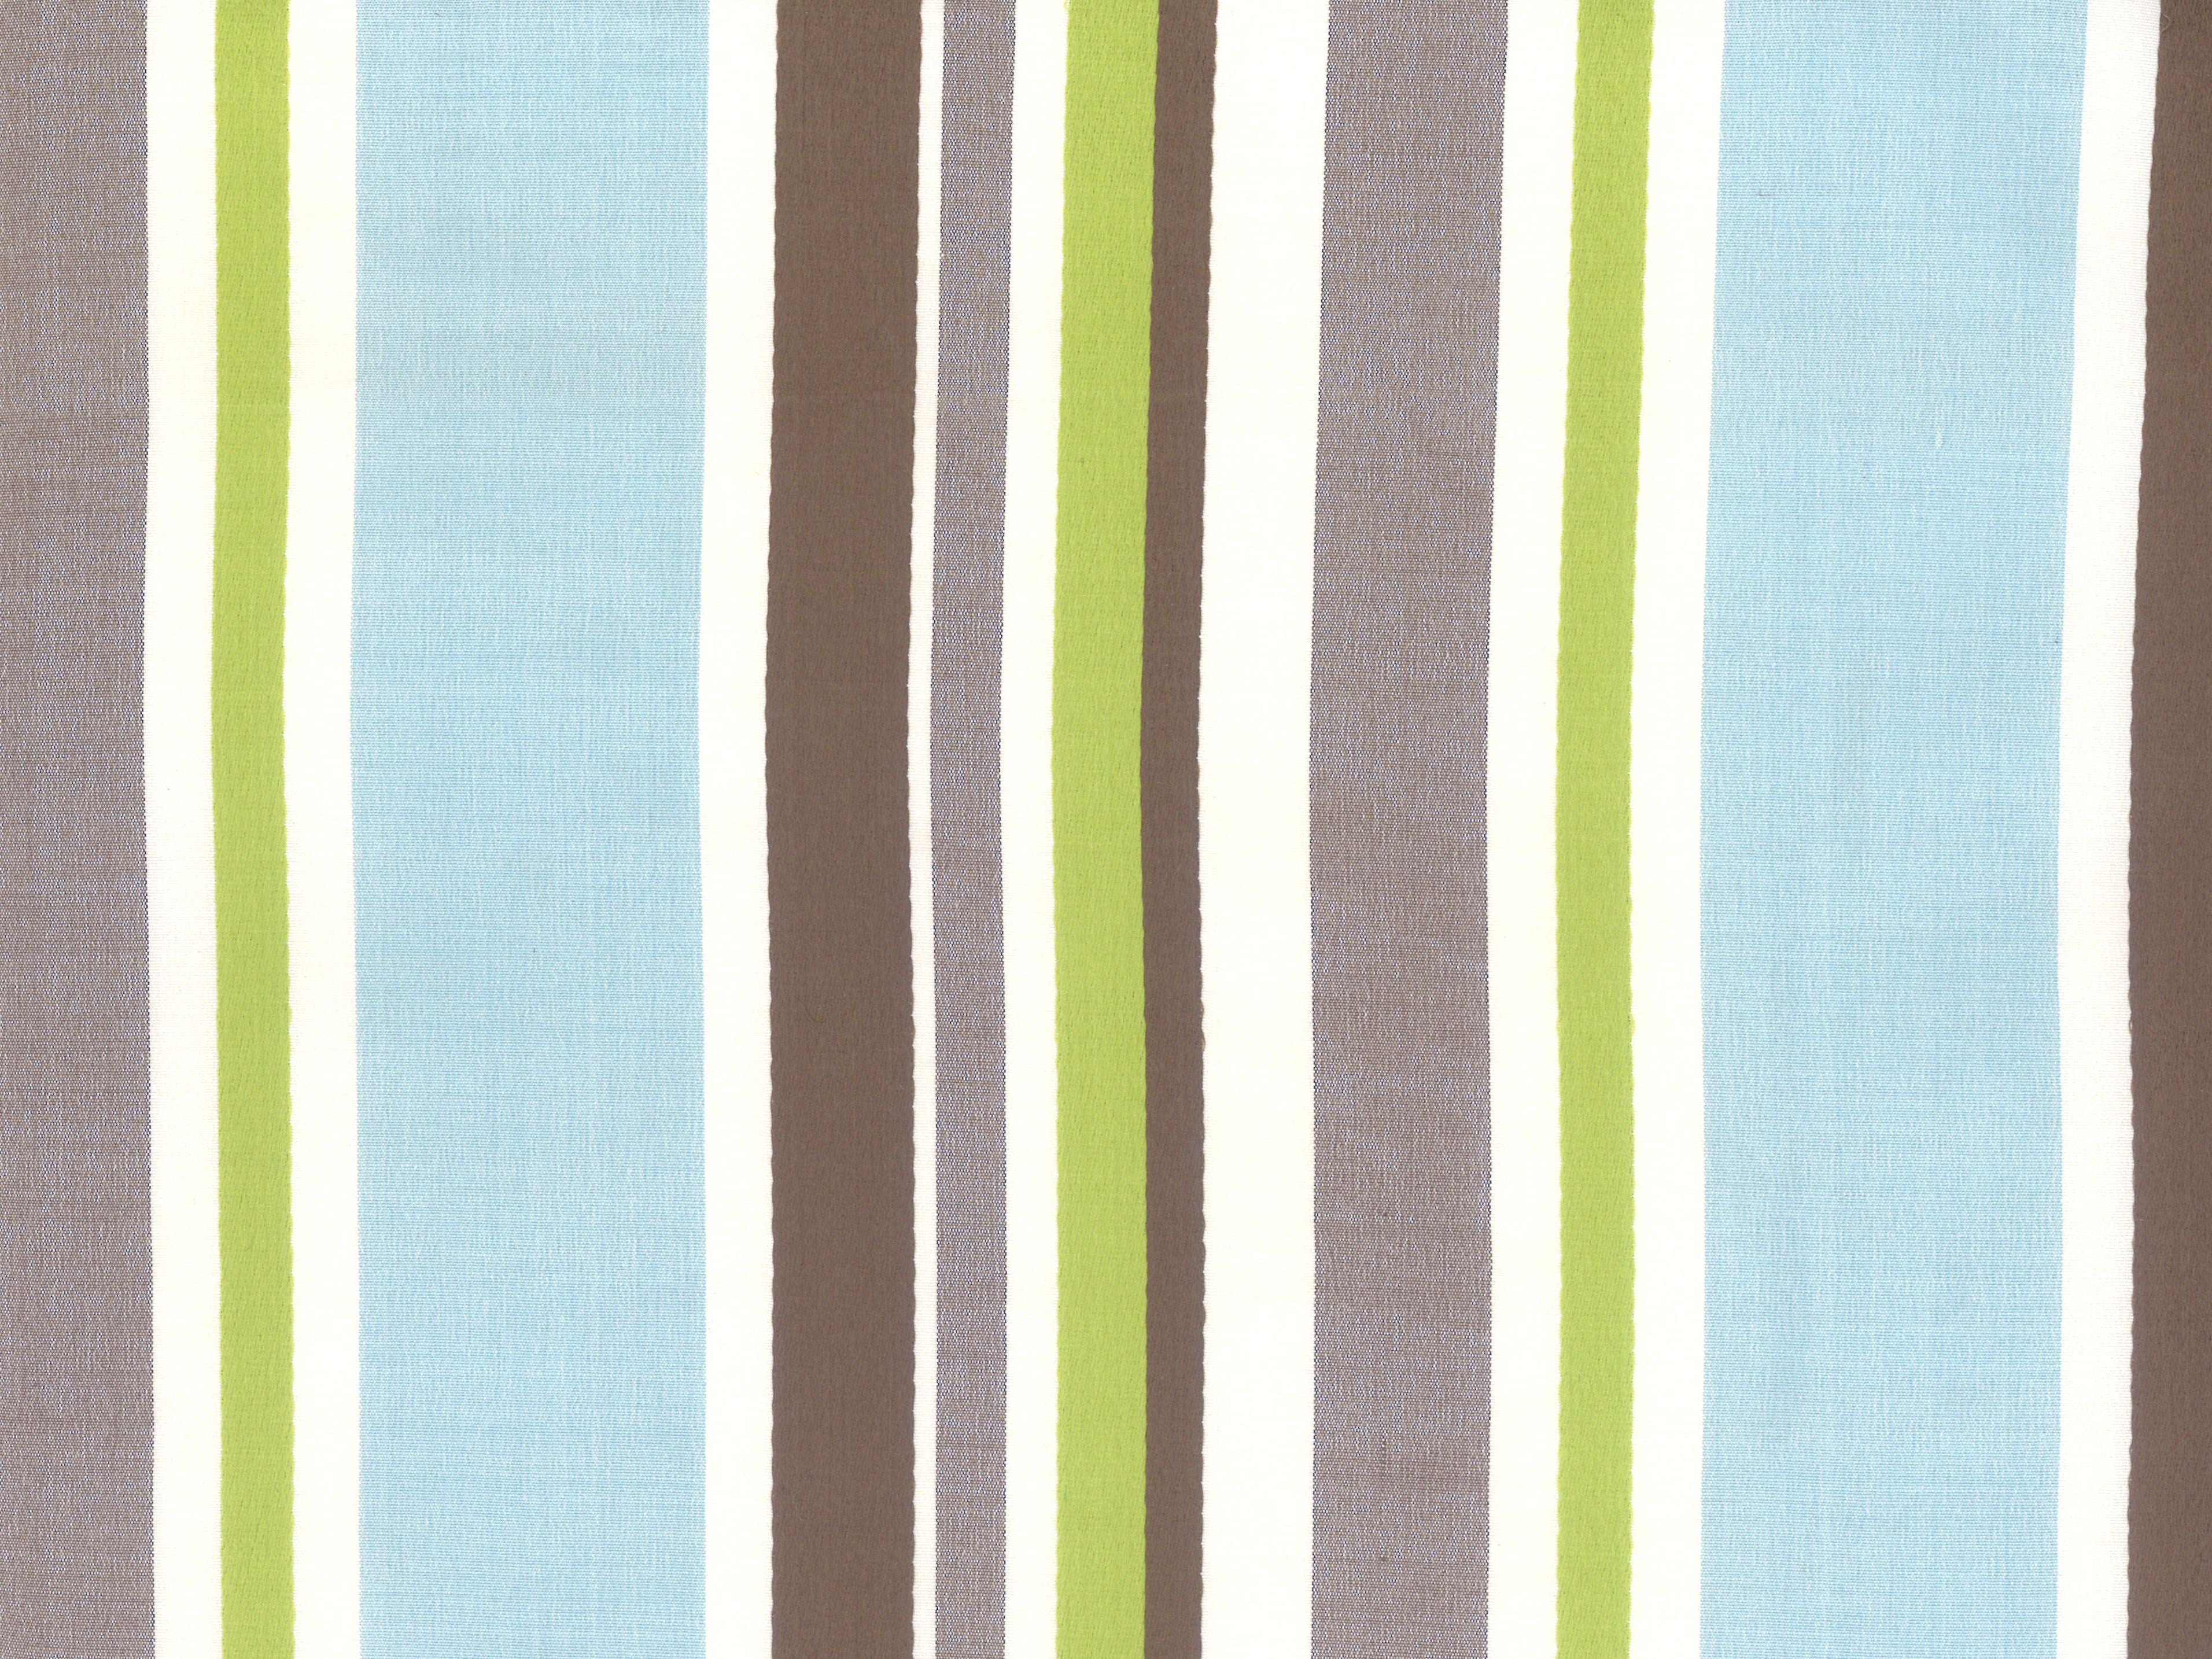 Tango fabric in aqua / multi color - pattern number PQ 0004K625 - by Scalamandre in the Old World Weavers collection